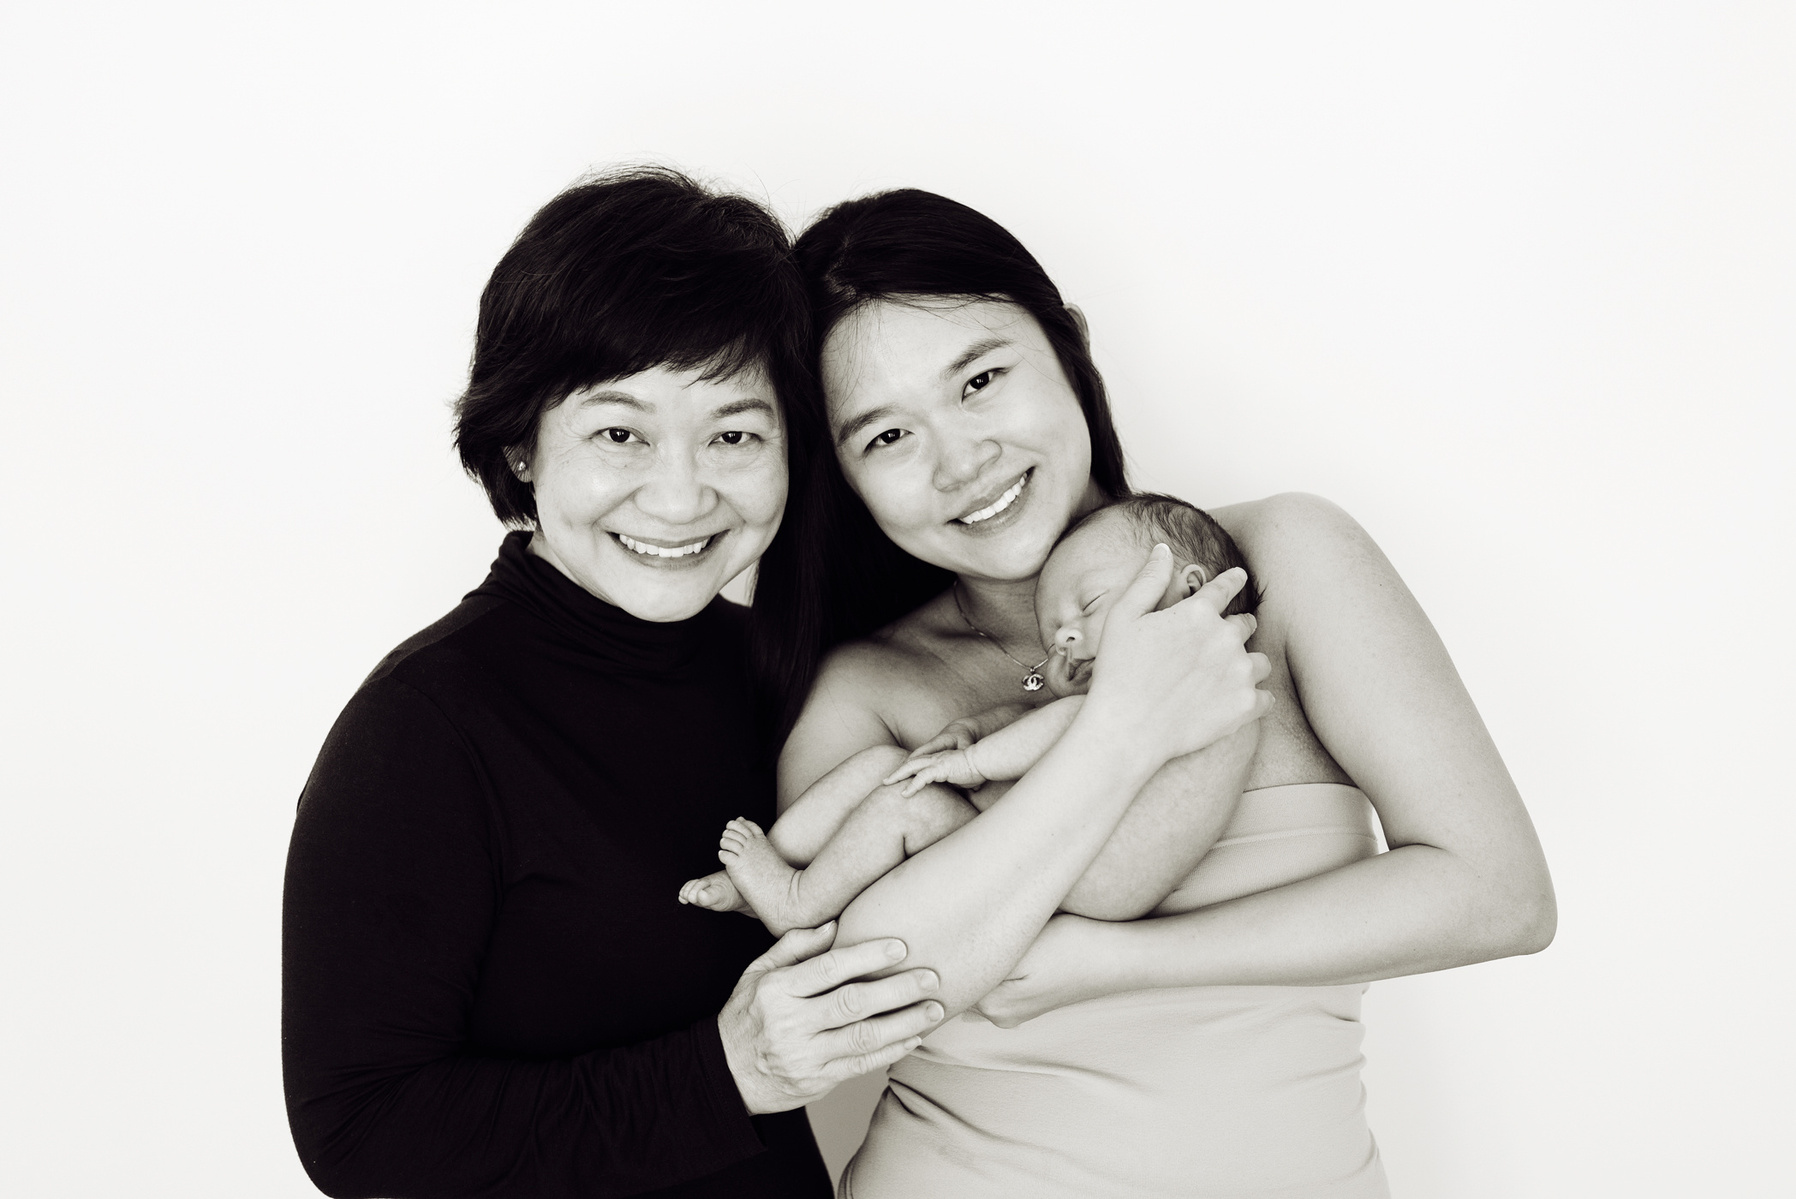 Three generations, the mother cradles her newborn son in her arms whilst the grandmother gets close for a professional family portrait with smiles. Photographed by Geneva's leading portrait photographer, Helen Putsman, based in Chêne-Bougeries.